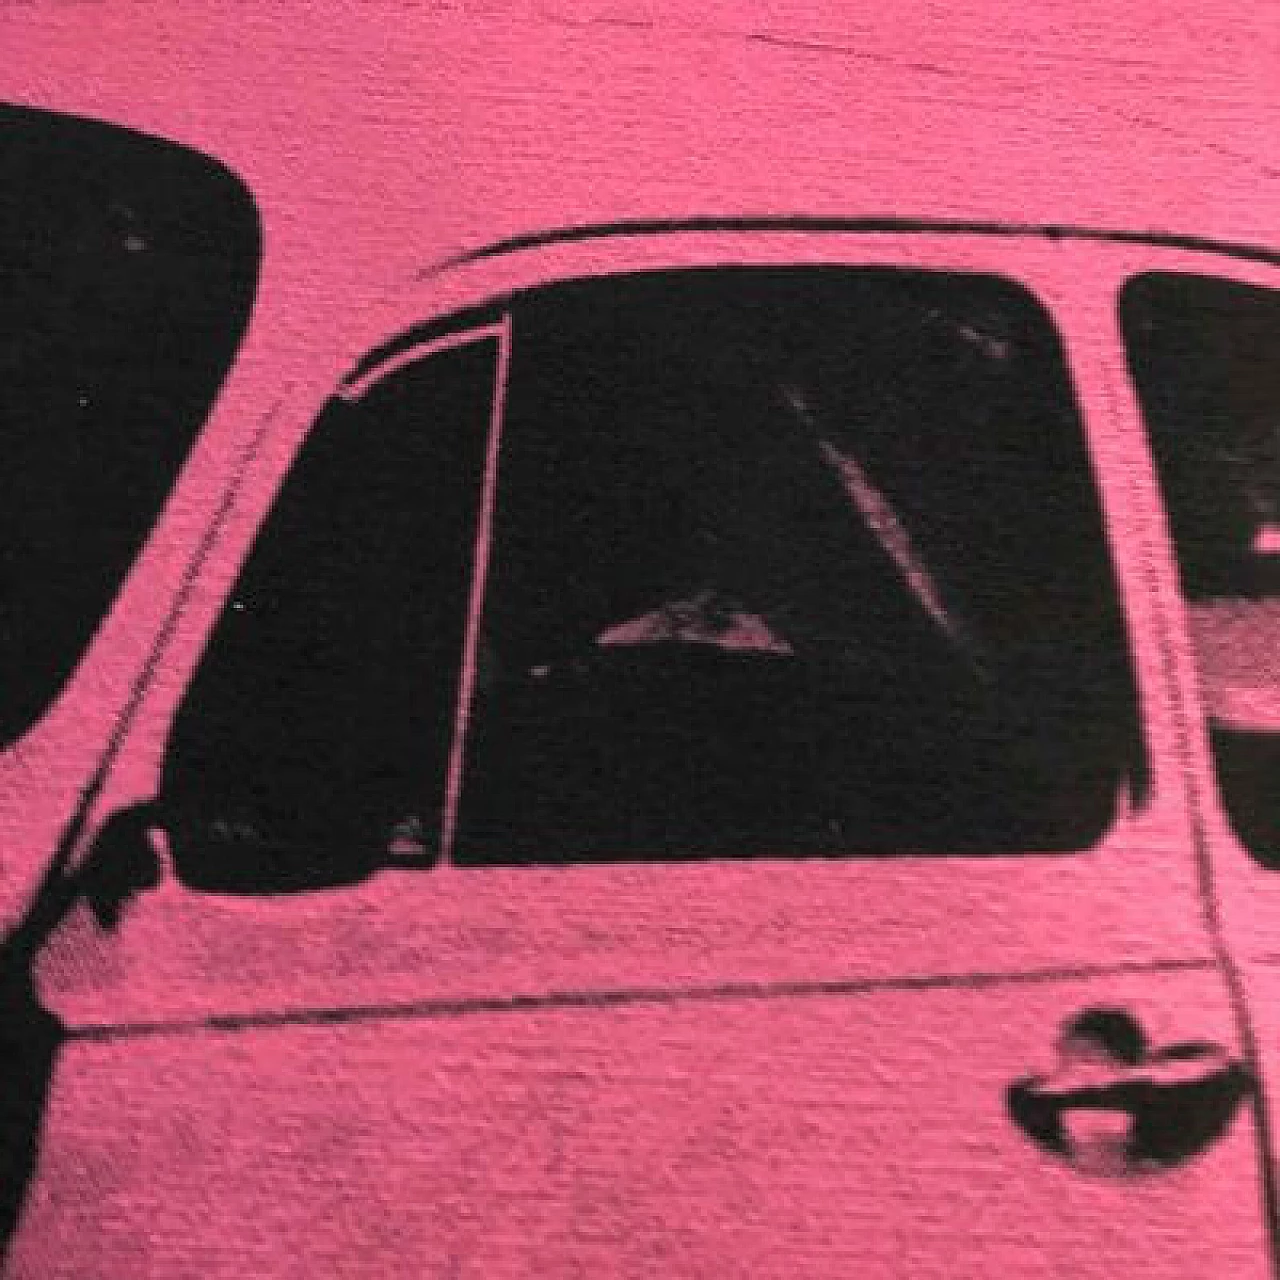 Andy Warhol, Volkswagen, lithograph, 1980s 12